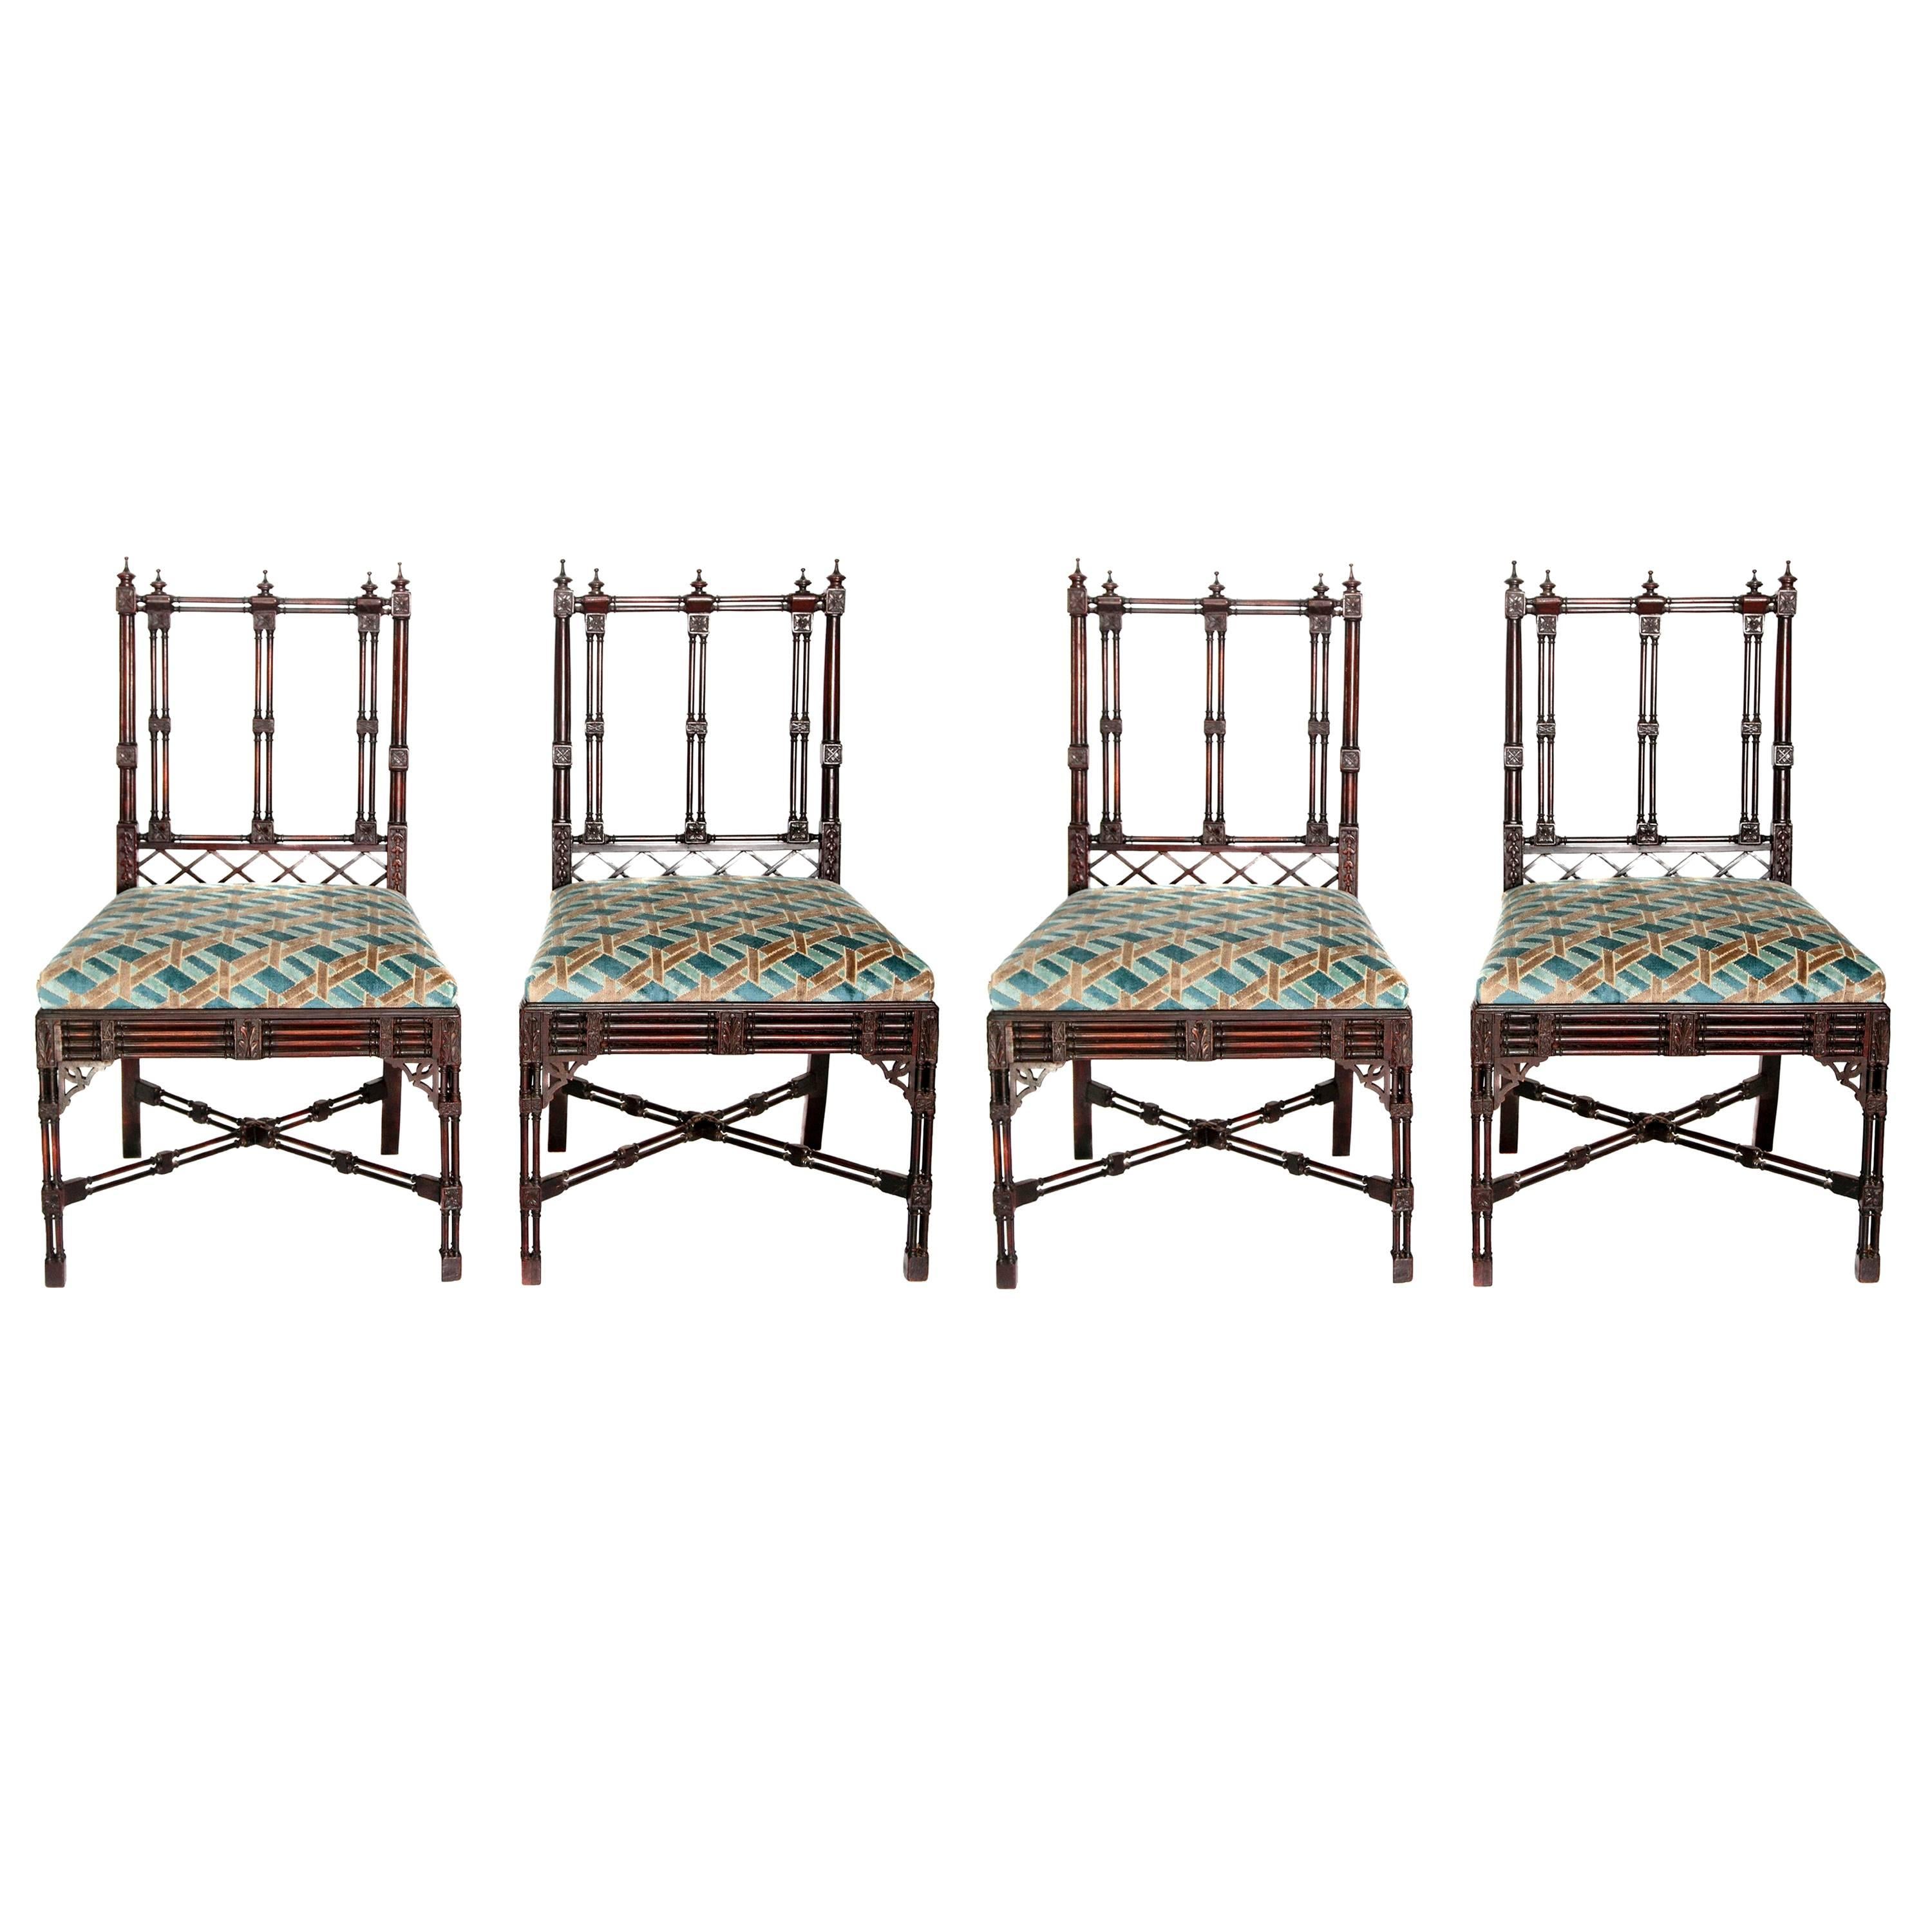 Group of Georgian Revival Chinese Chippendale Style Chairs